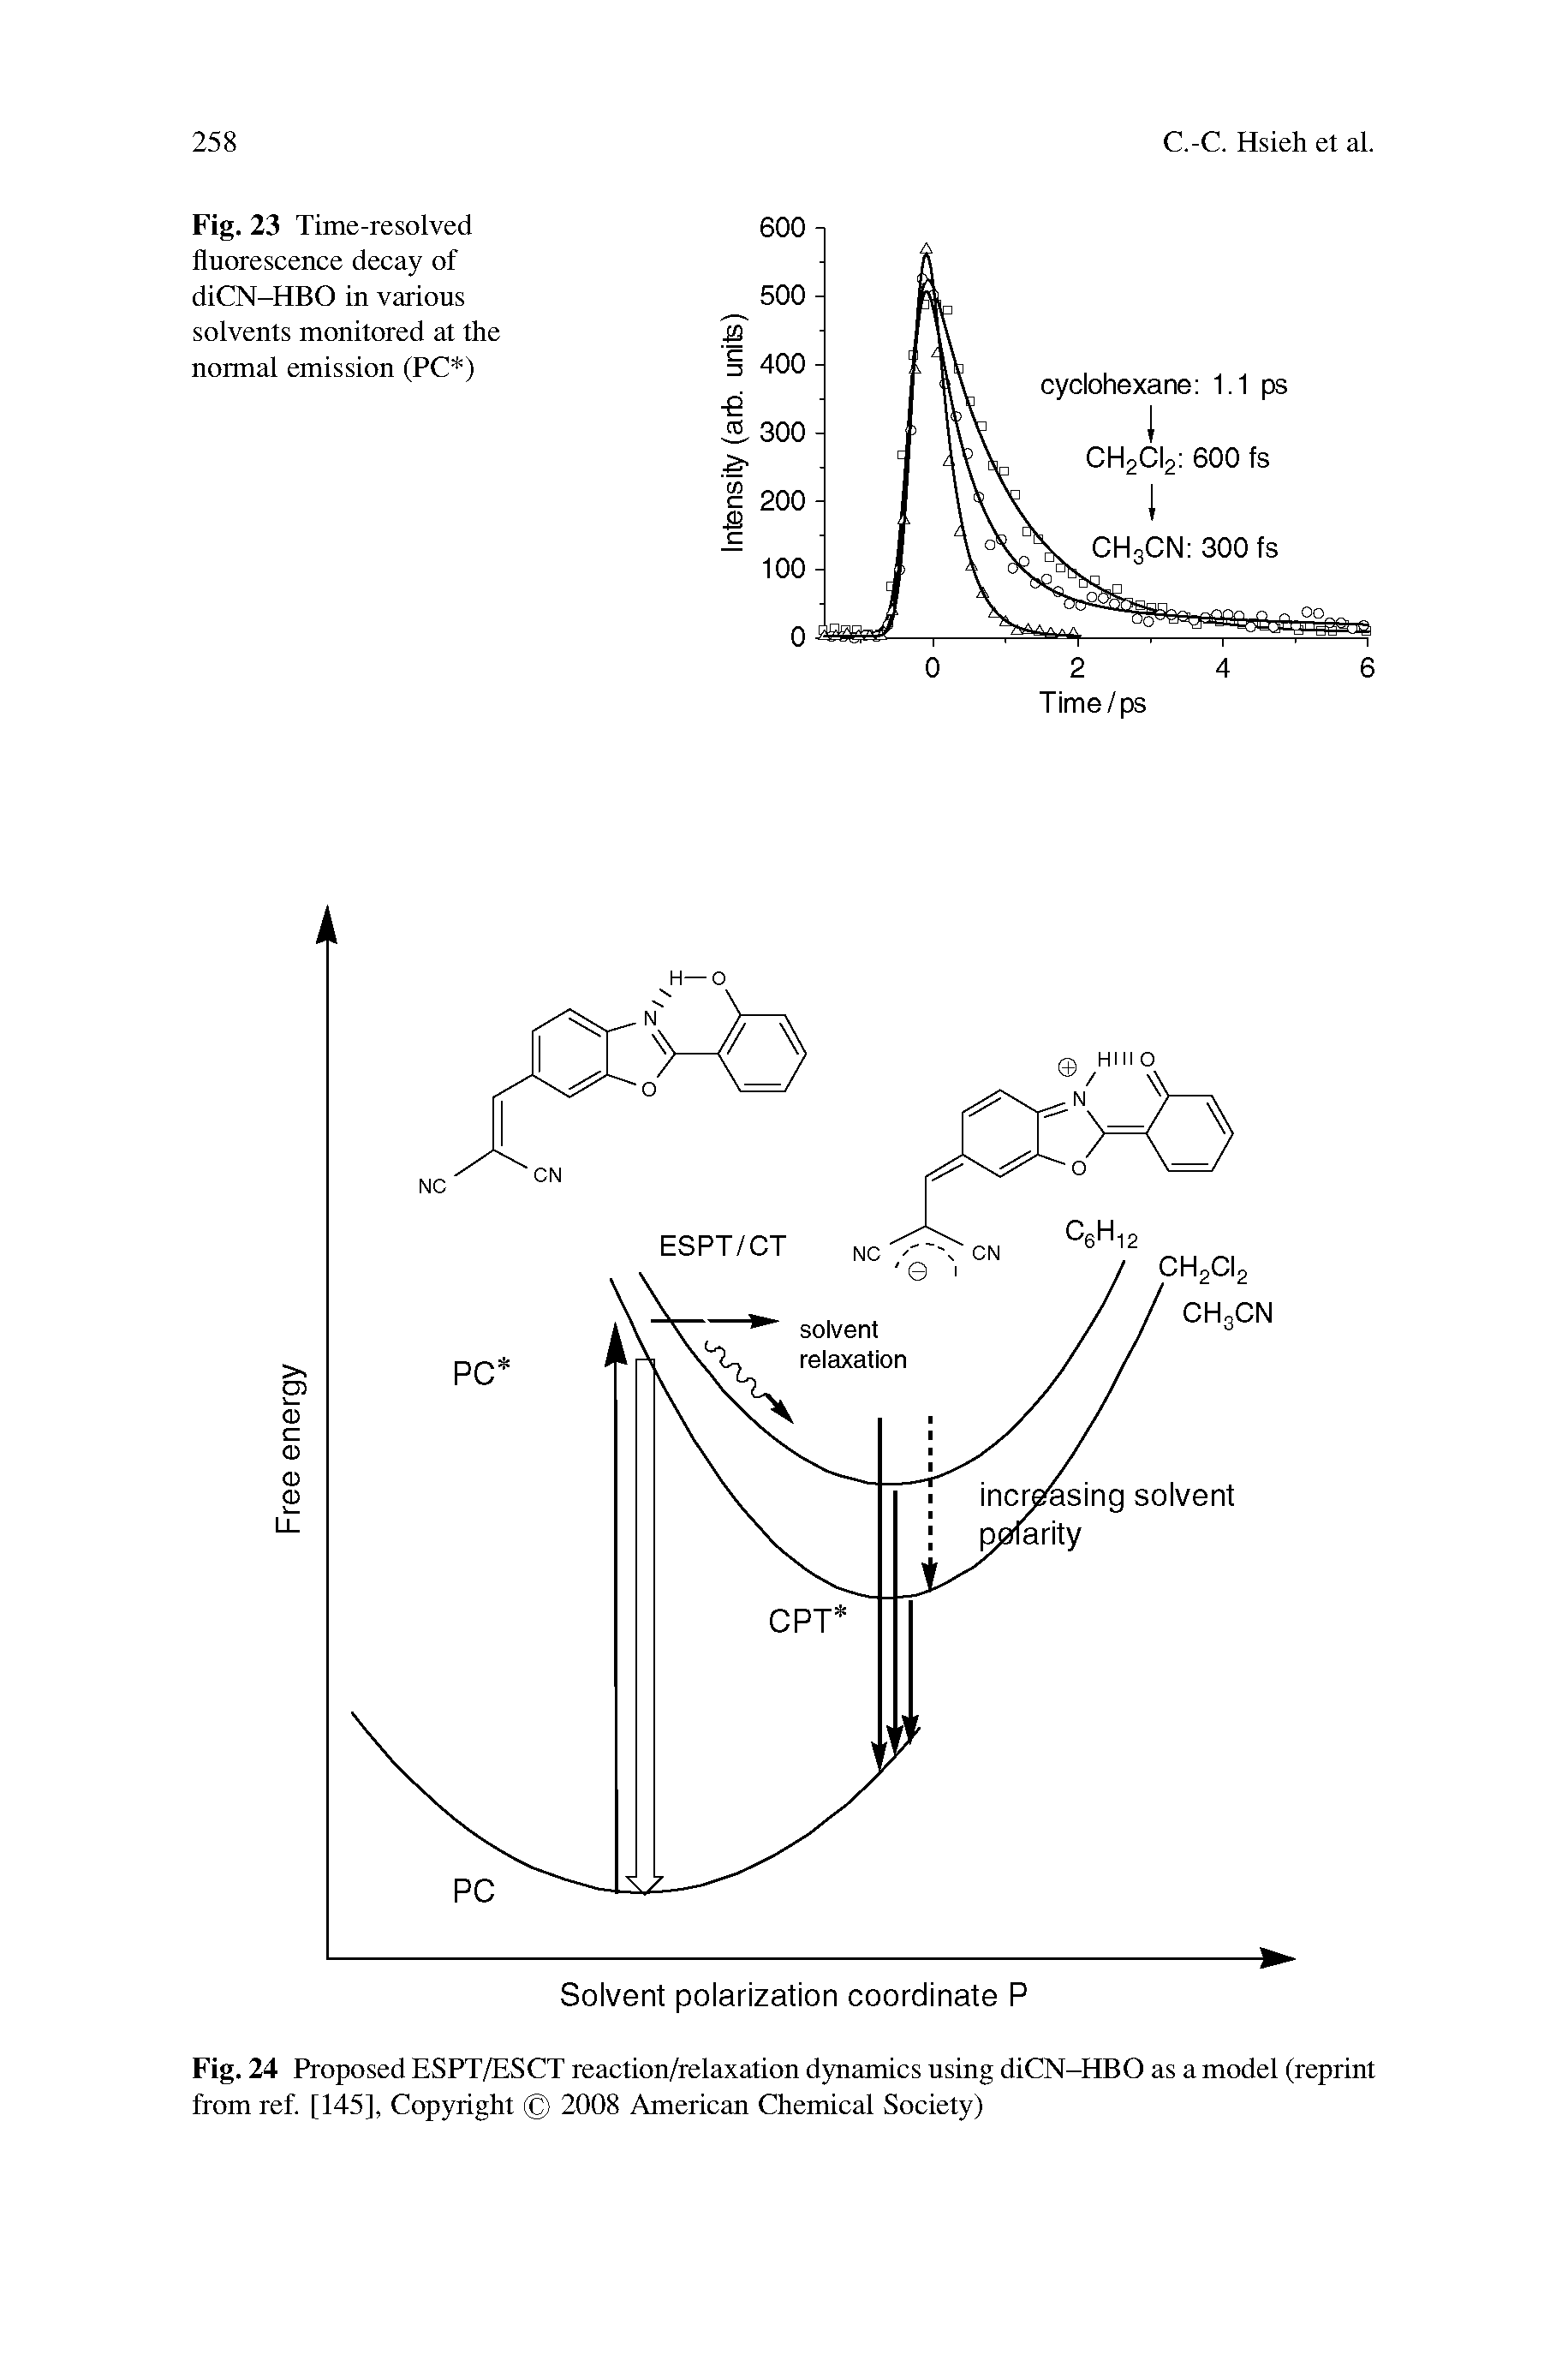 Fig. 24 Proposed ESPT/ESCT reaction/relaxation dynamics using diCN-HBO as a model (reprint from ref. [145], Copyright 2008 American Chemical Society)...